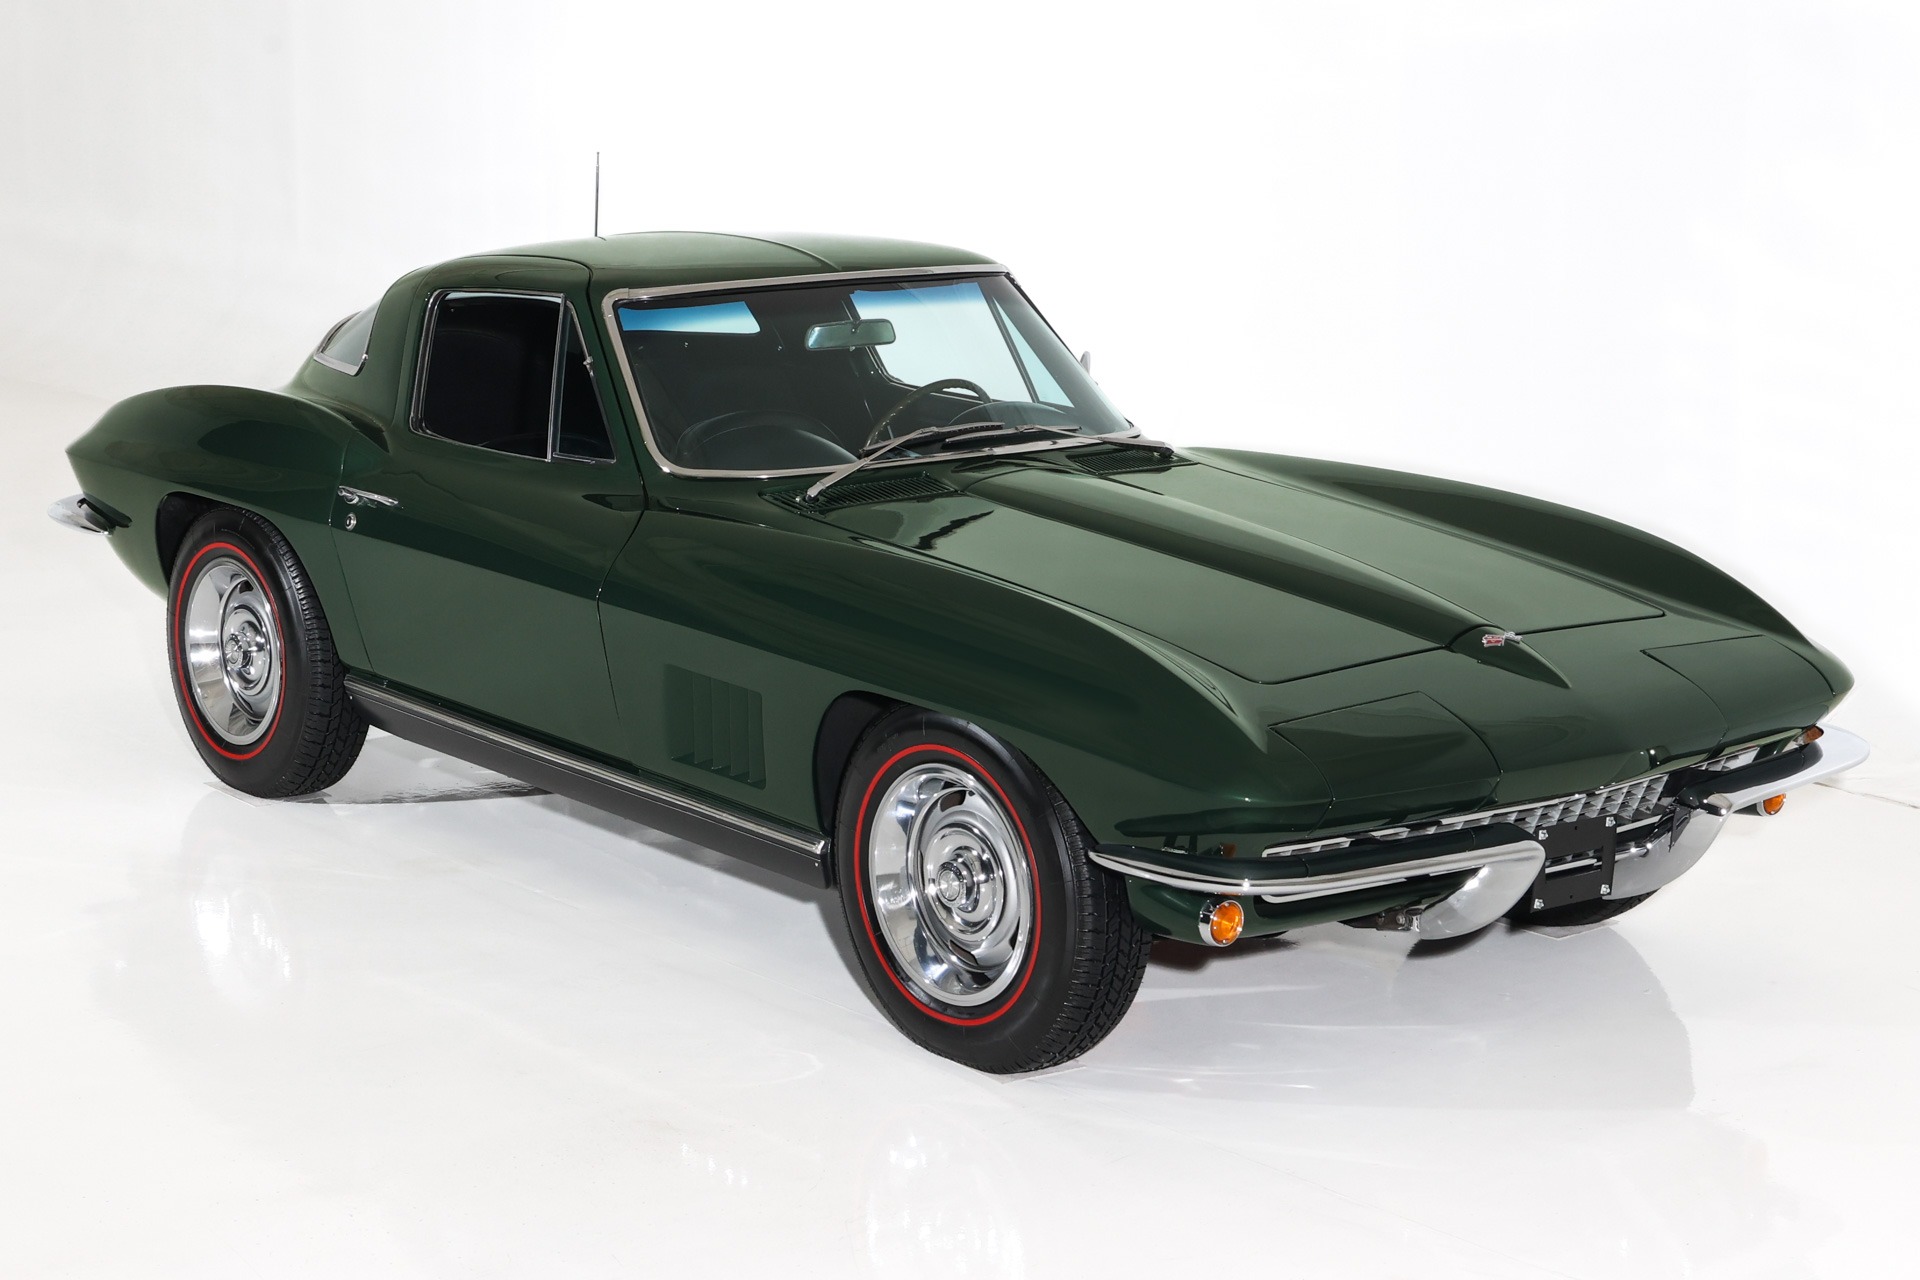 For Sale Used 1967 Chevrolet Corvette Matching #s 327/300 AC Car | American Dream Machines Des Moines IA 50309